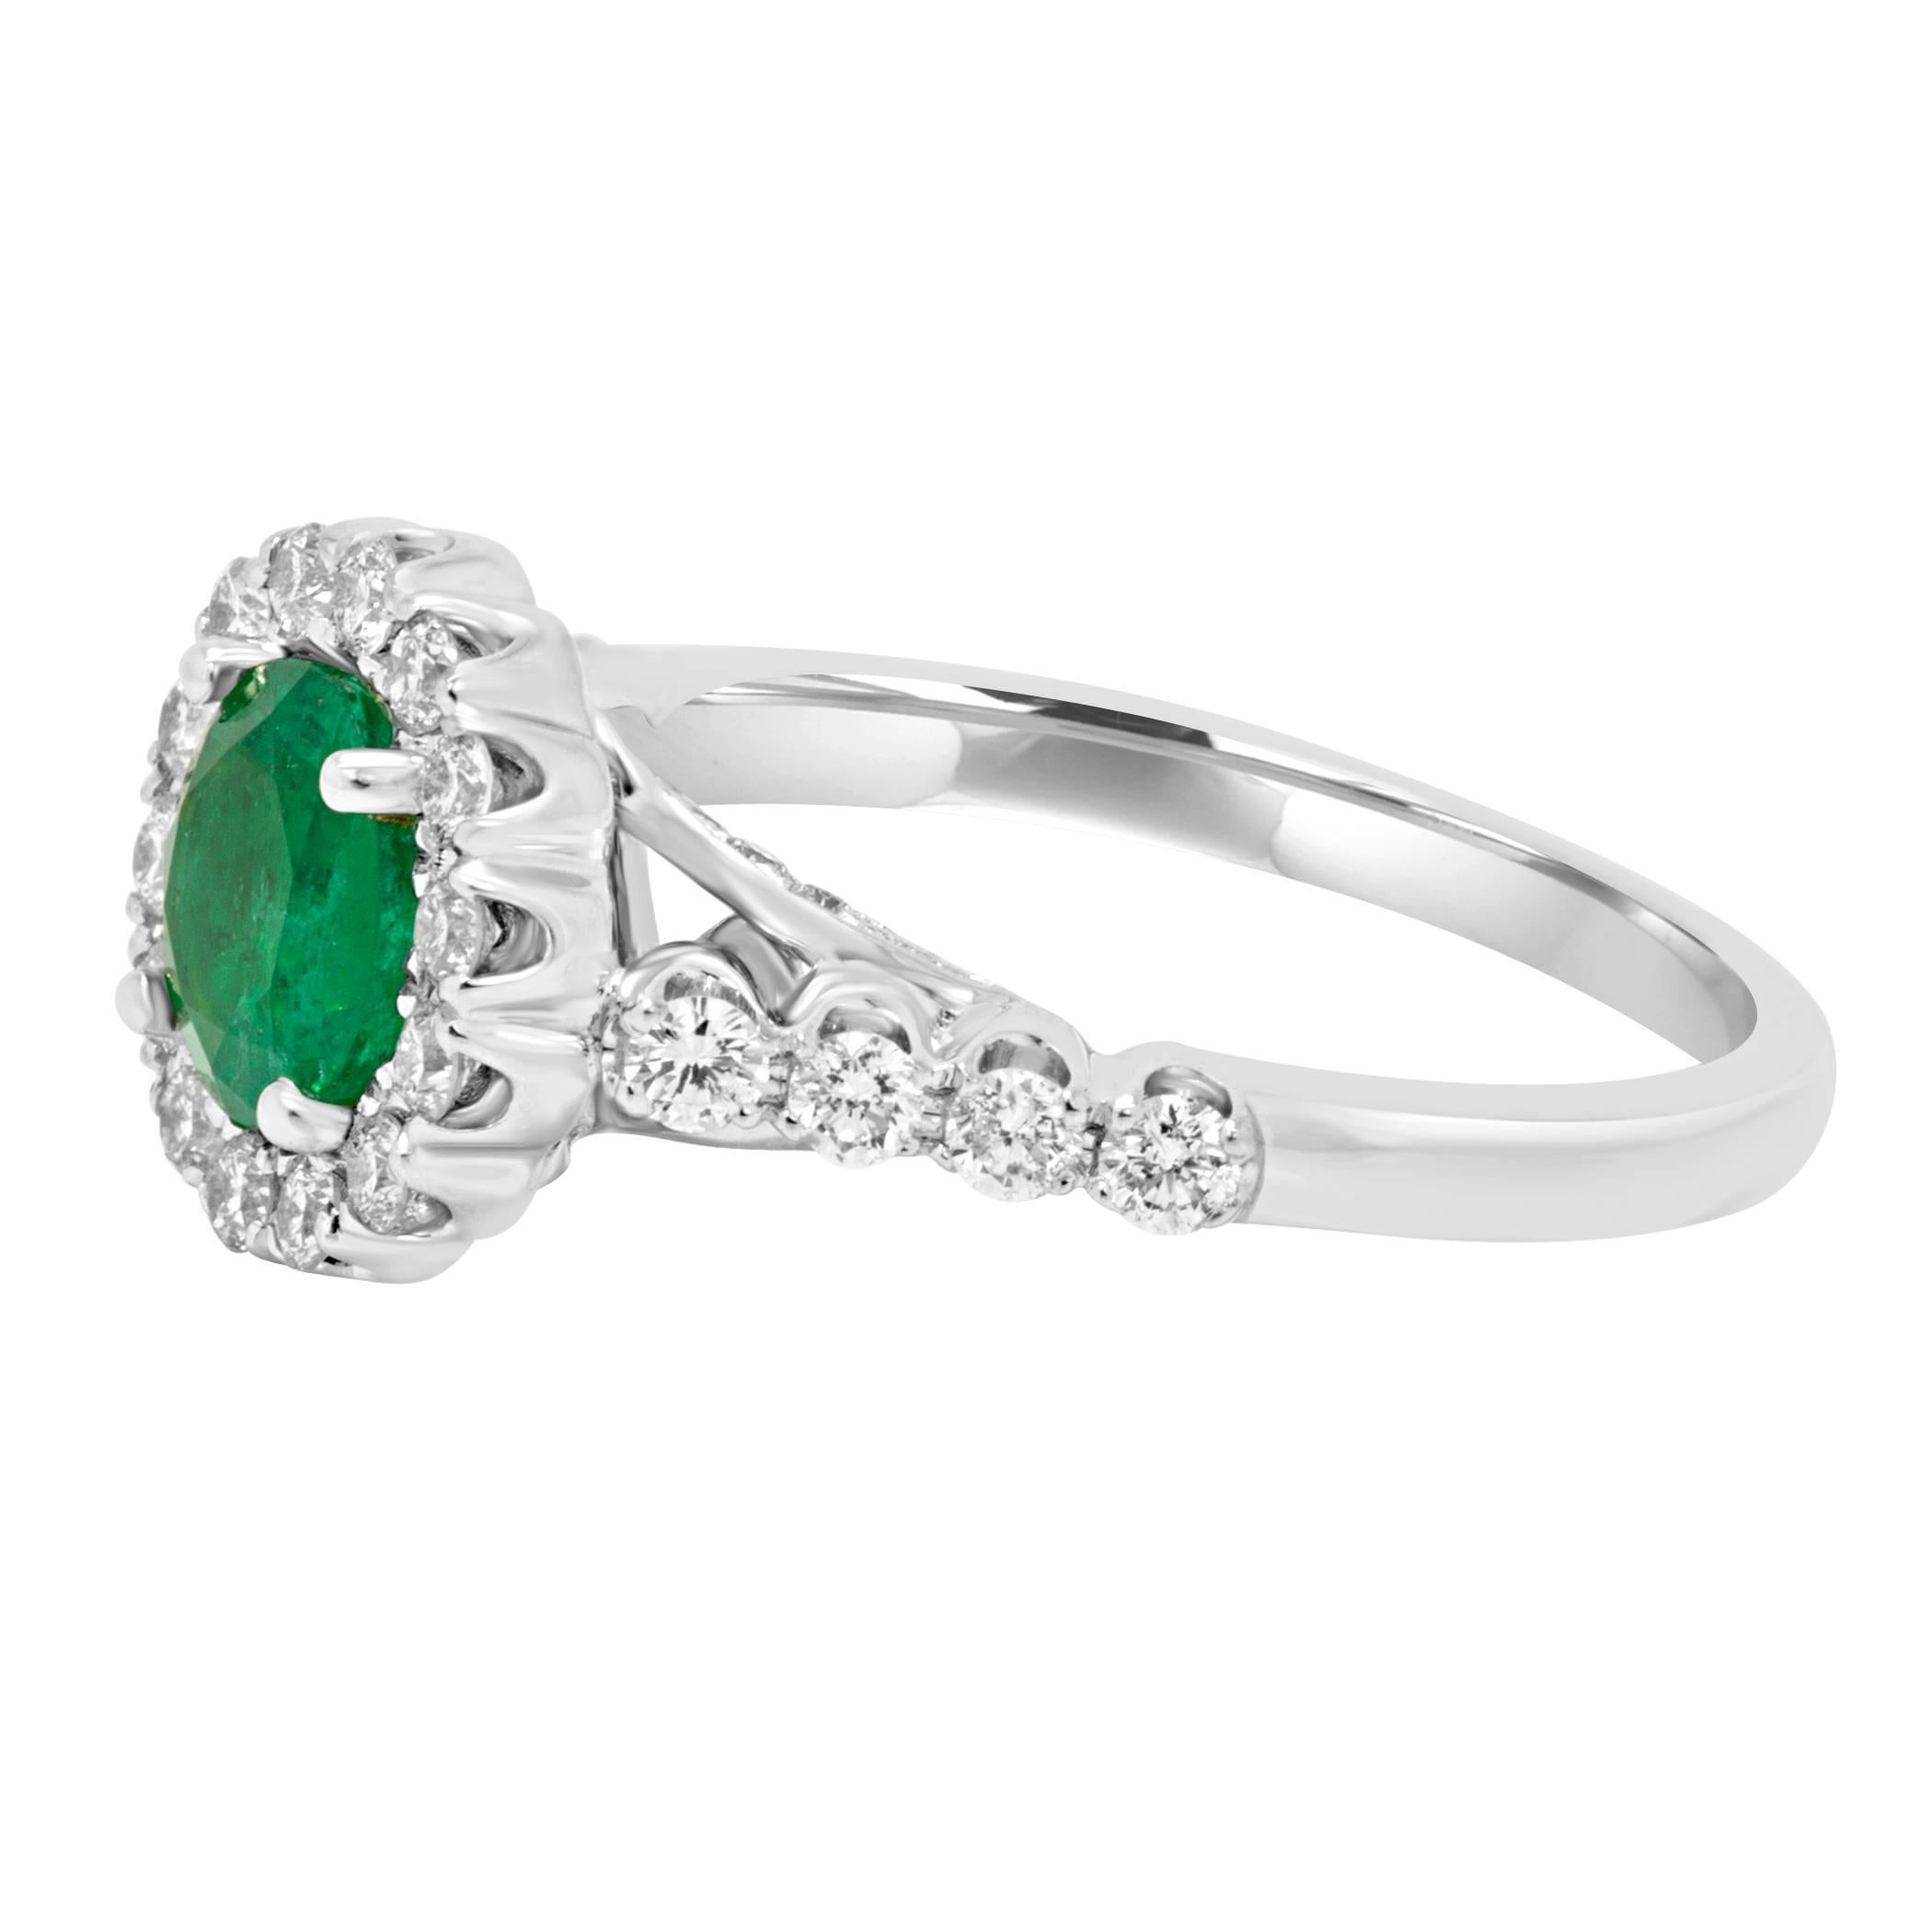 Stunning Emerald Round 1.08 Carat encircled in a halo of white G-H Color VS-SI Clarity diamond rounds 0.75 Carat Set in 18K White Gold Bridal Fashion Cocktail Ring.

Style available in different price ranges. Prices are based on your selection of